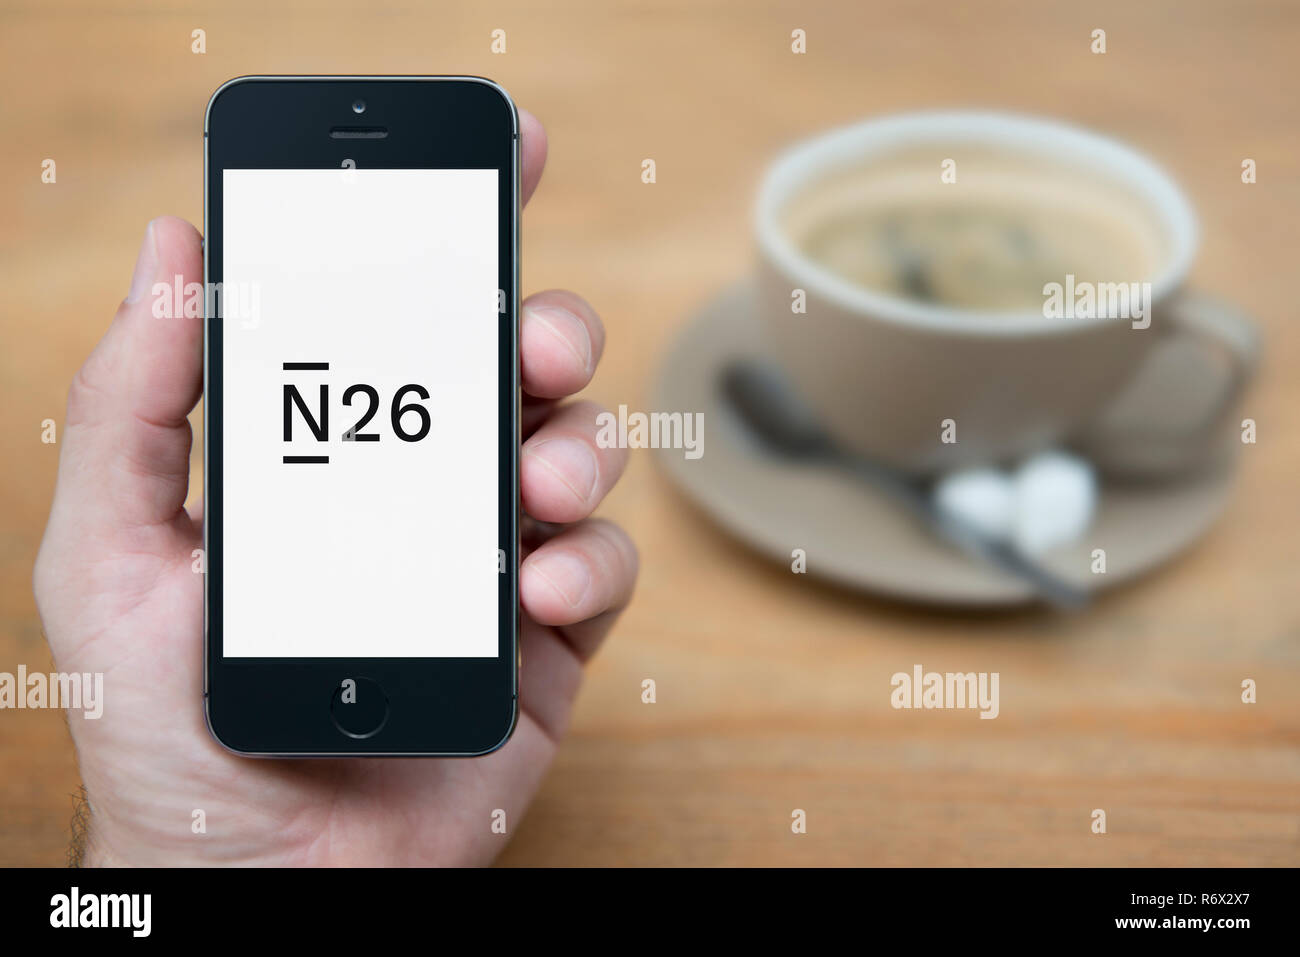 A man looks at his iPhone which displays the N26 Bank logo (Editorial use only). Stock Photo